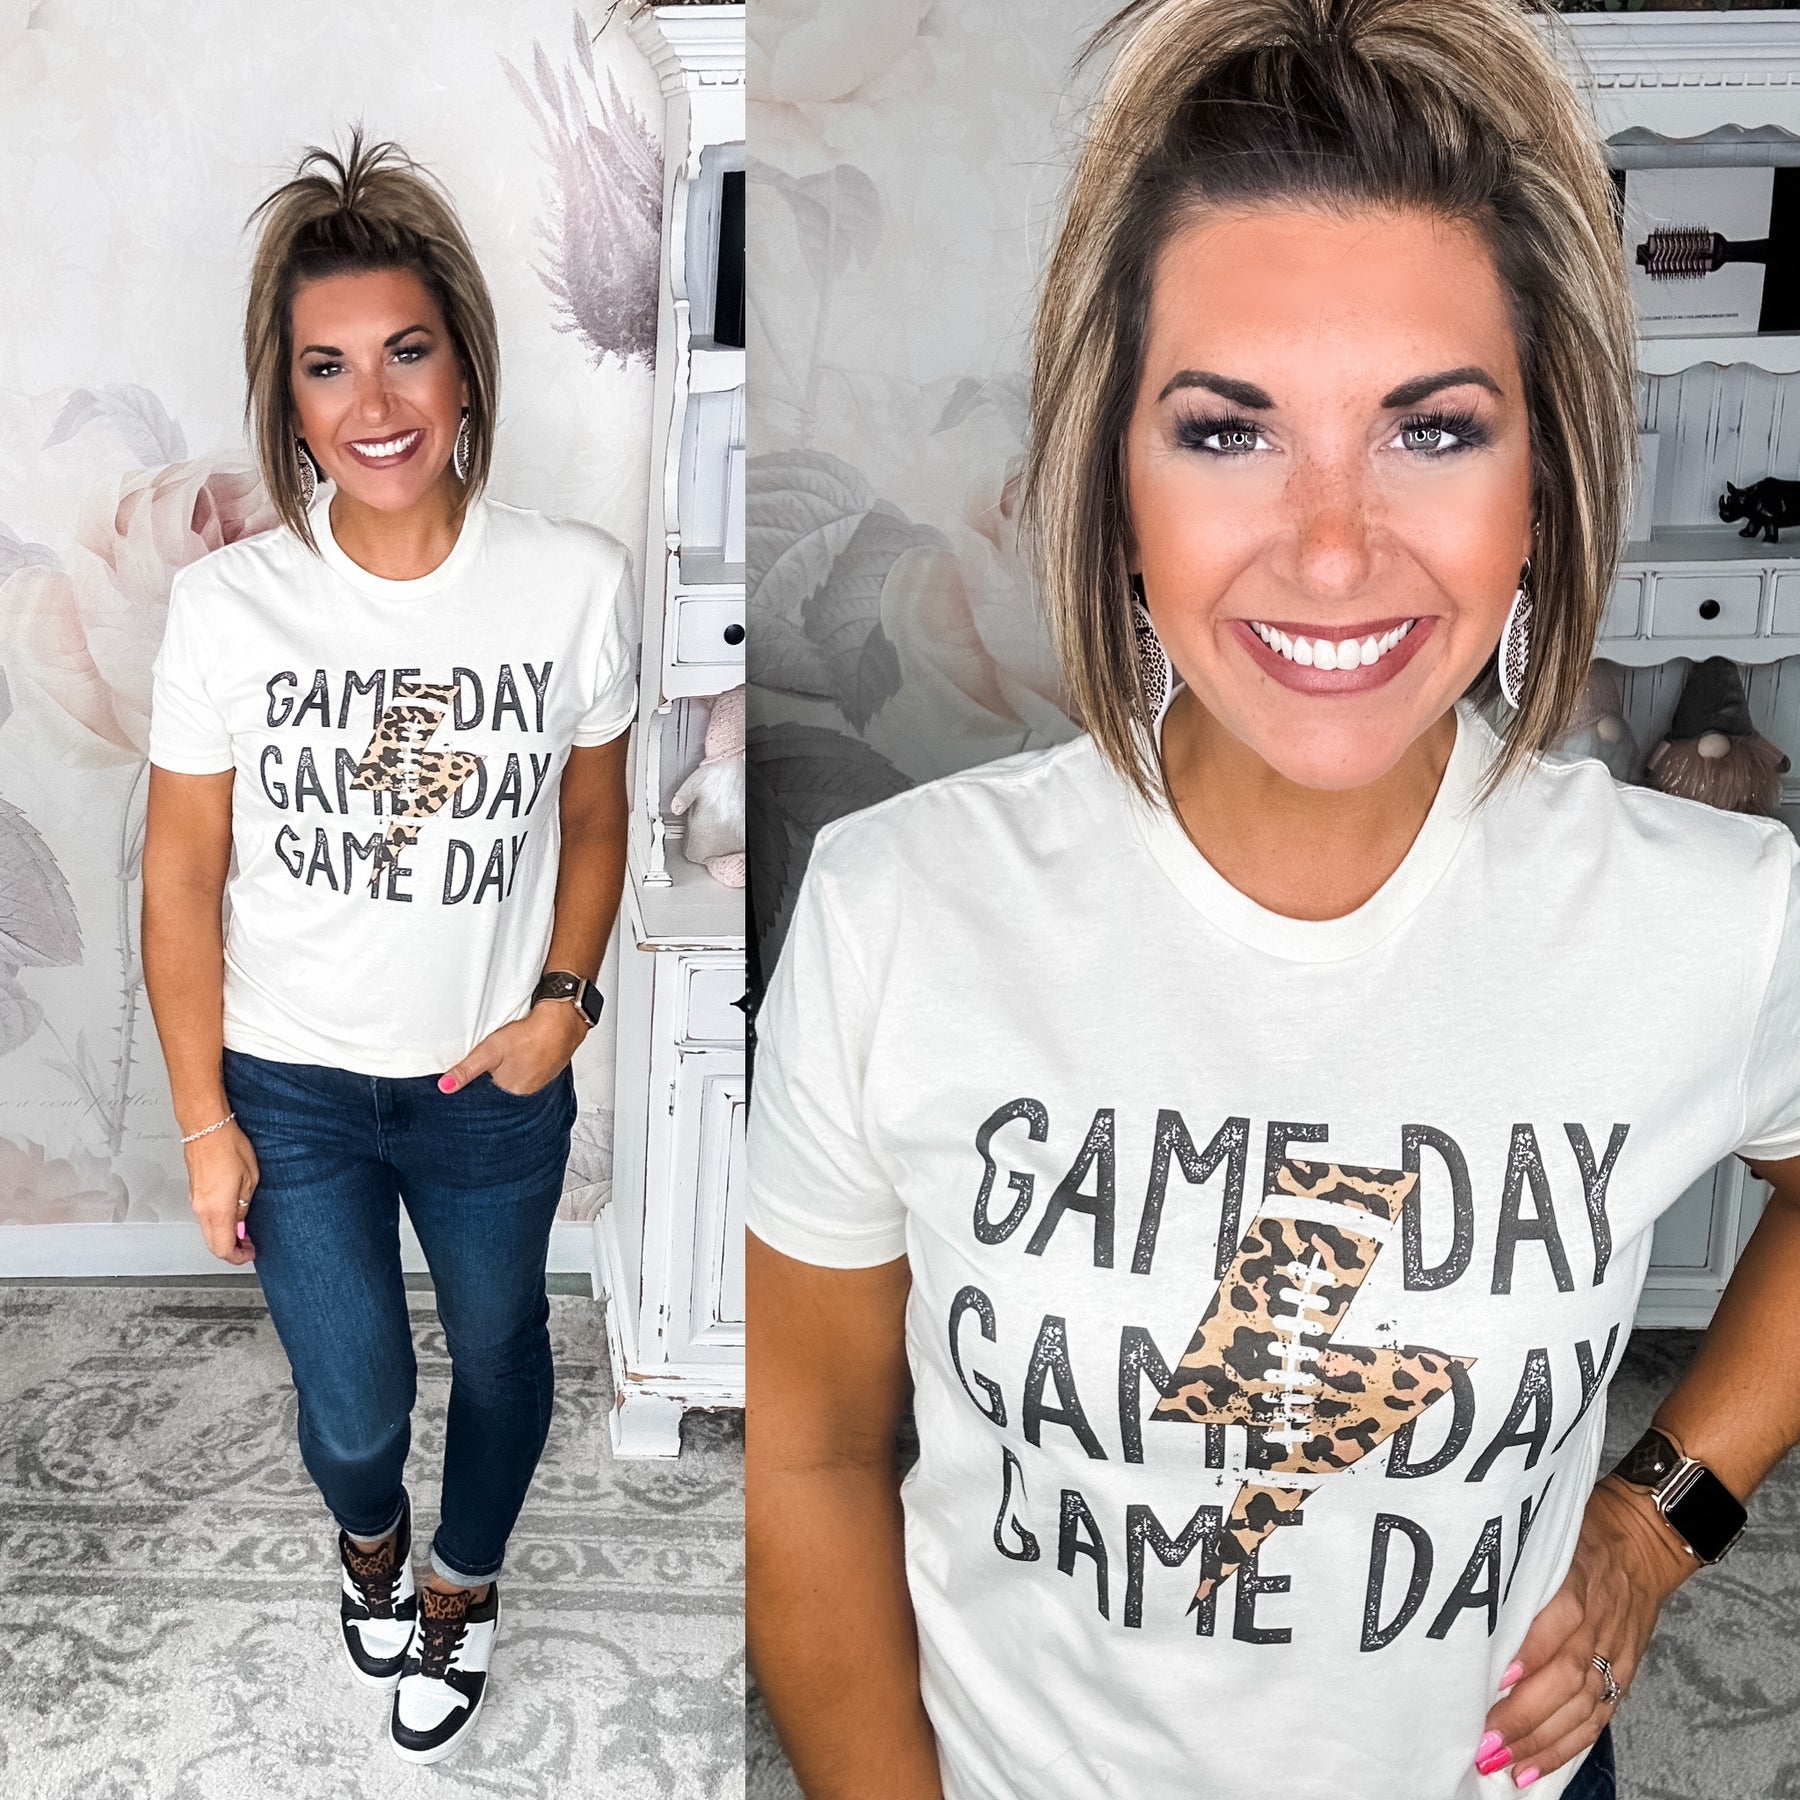 Game Day Lightning Bolt Graphic Tee